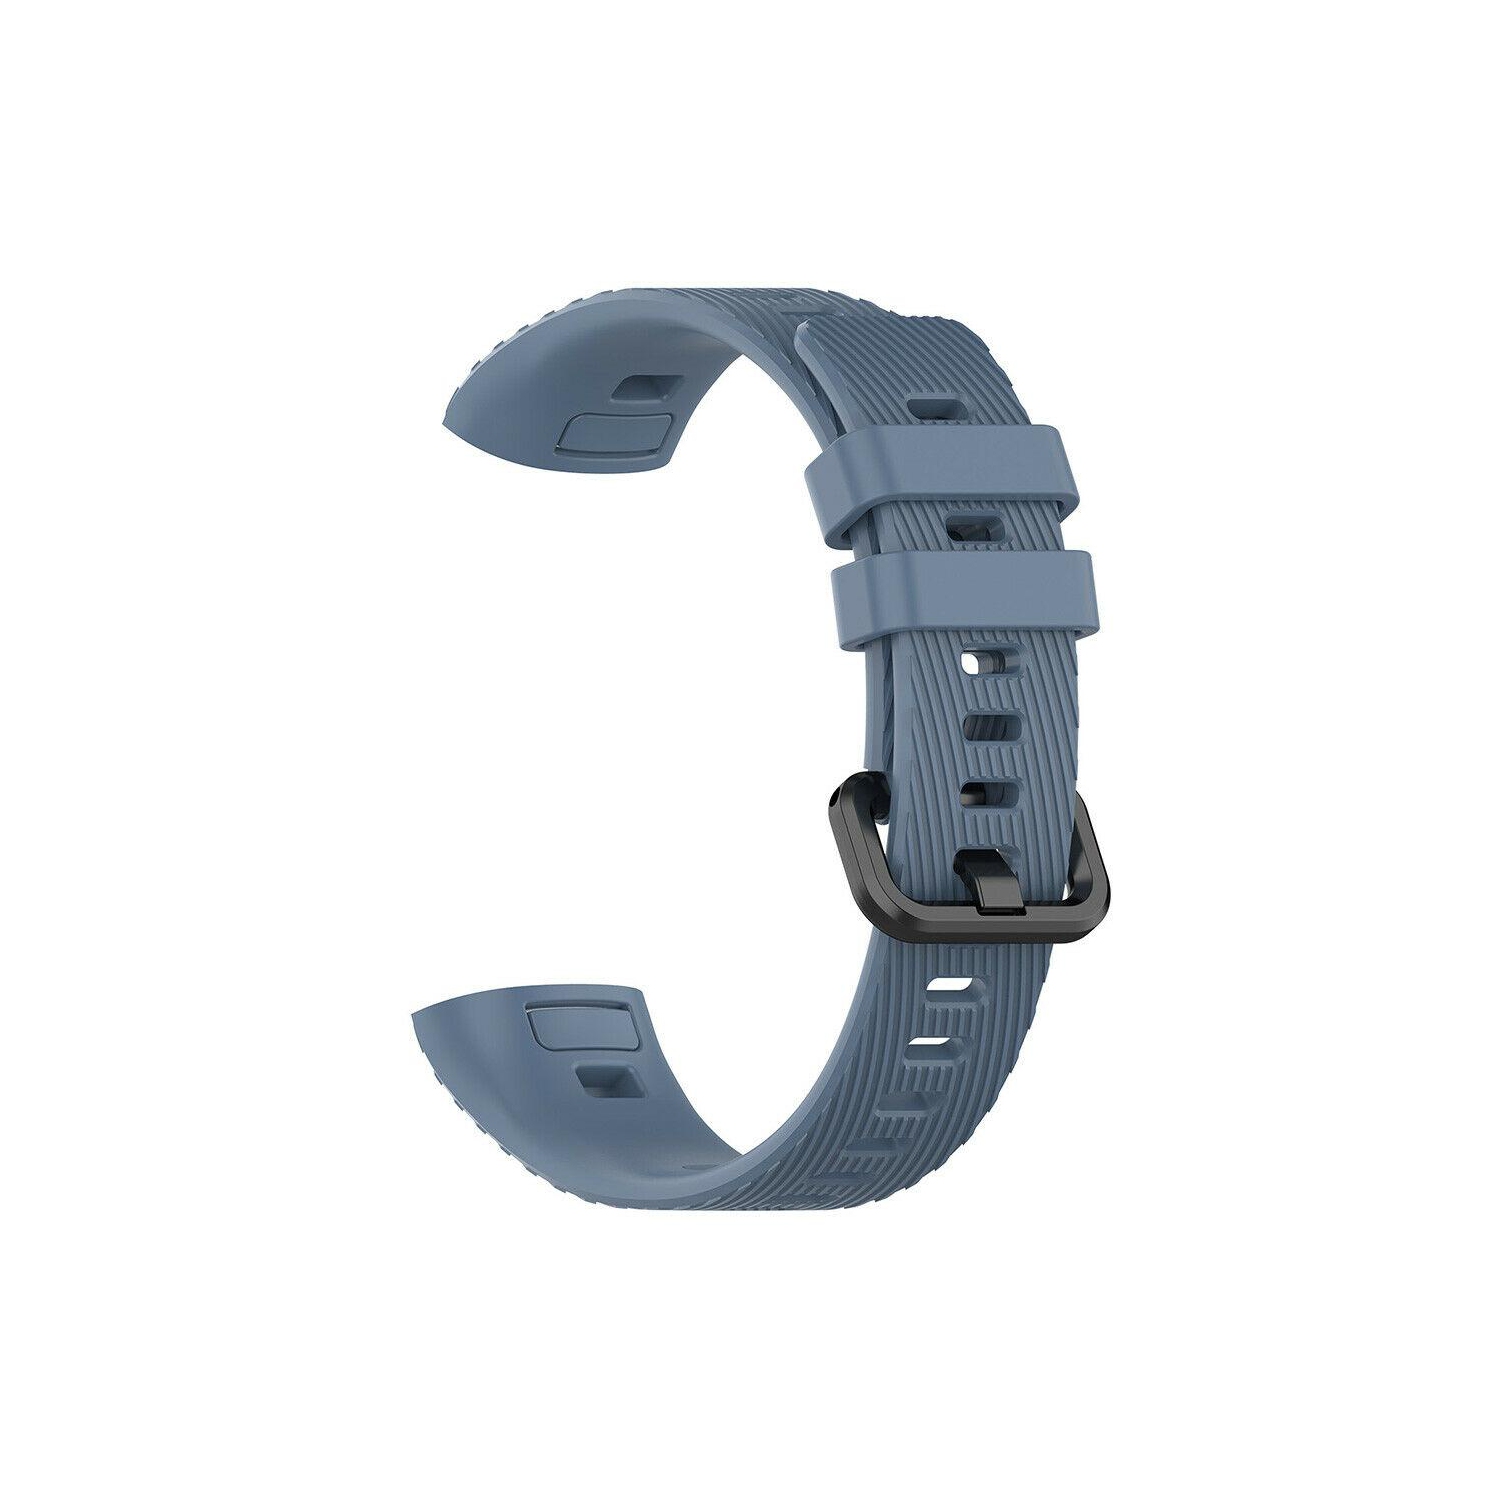 Silicone Watchband Bracelet Strap w/Buckle for Huawei Band 4 Pro TER-B29S